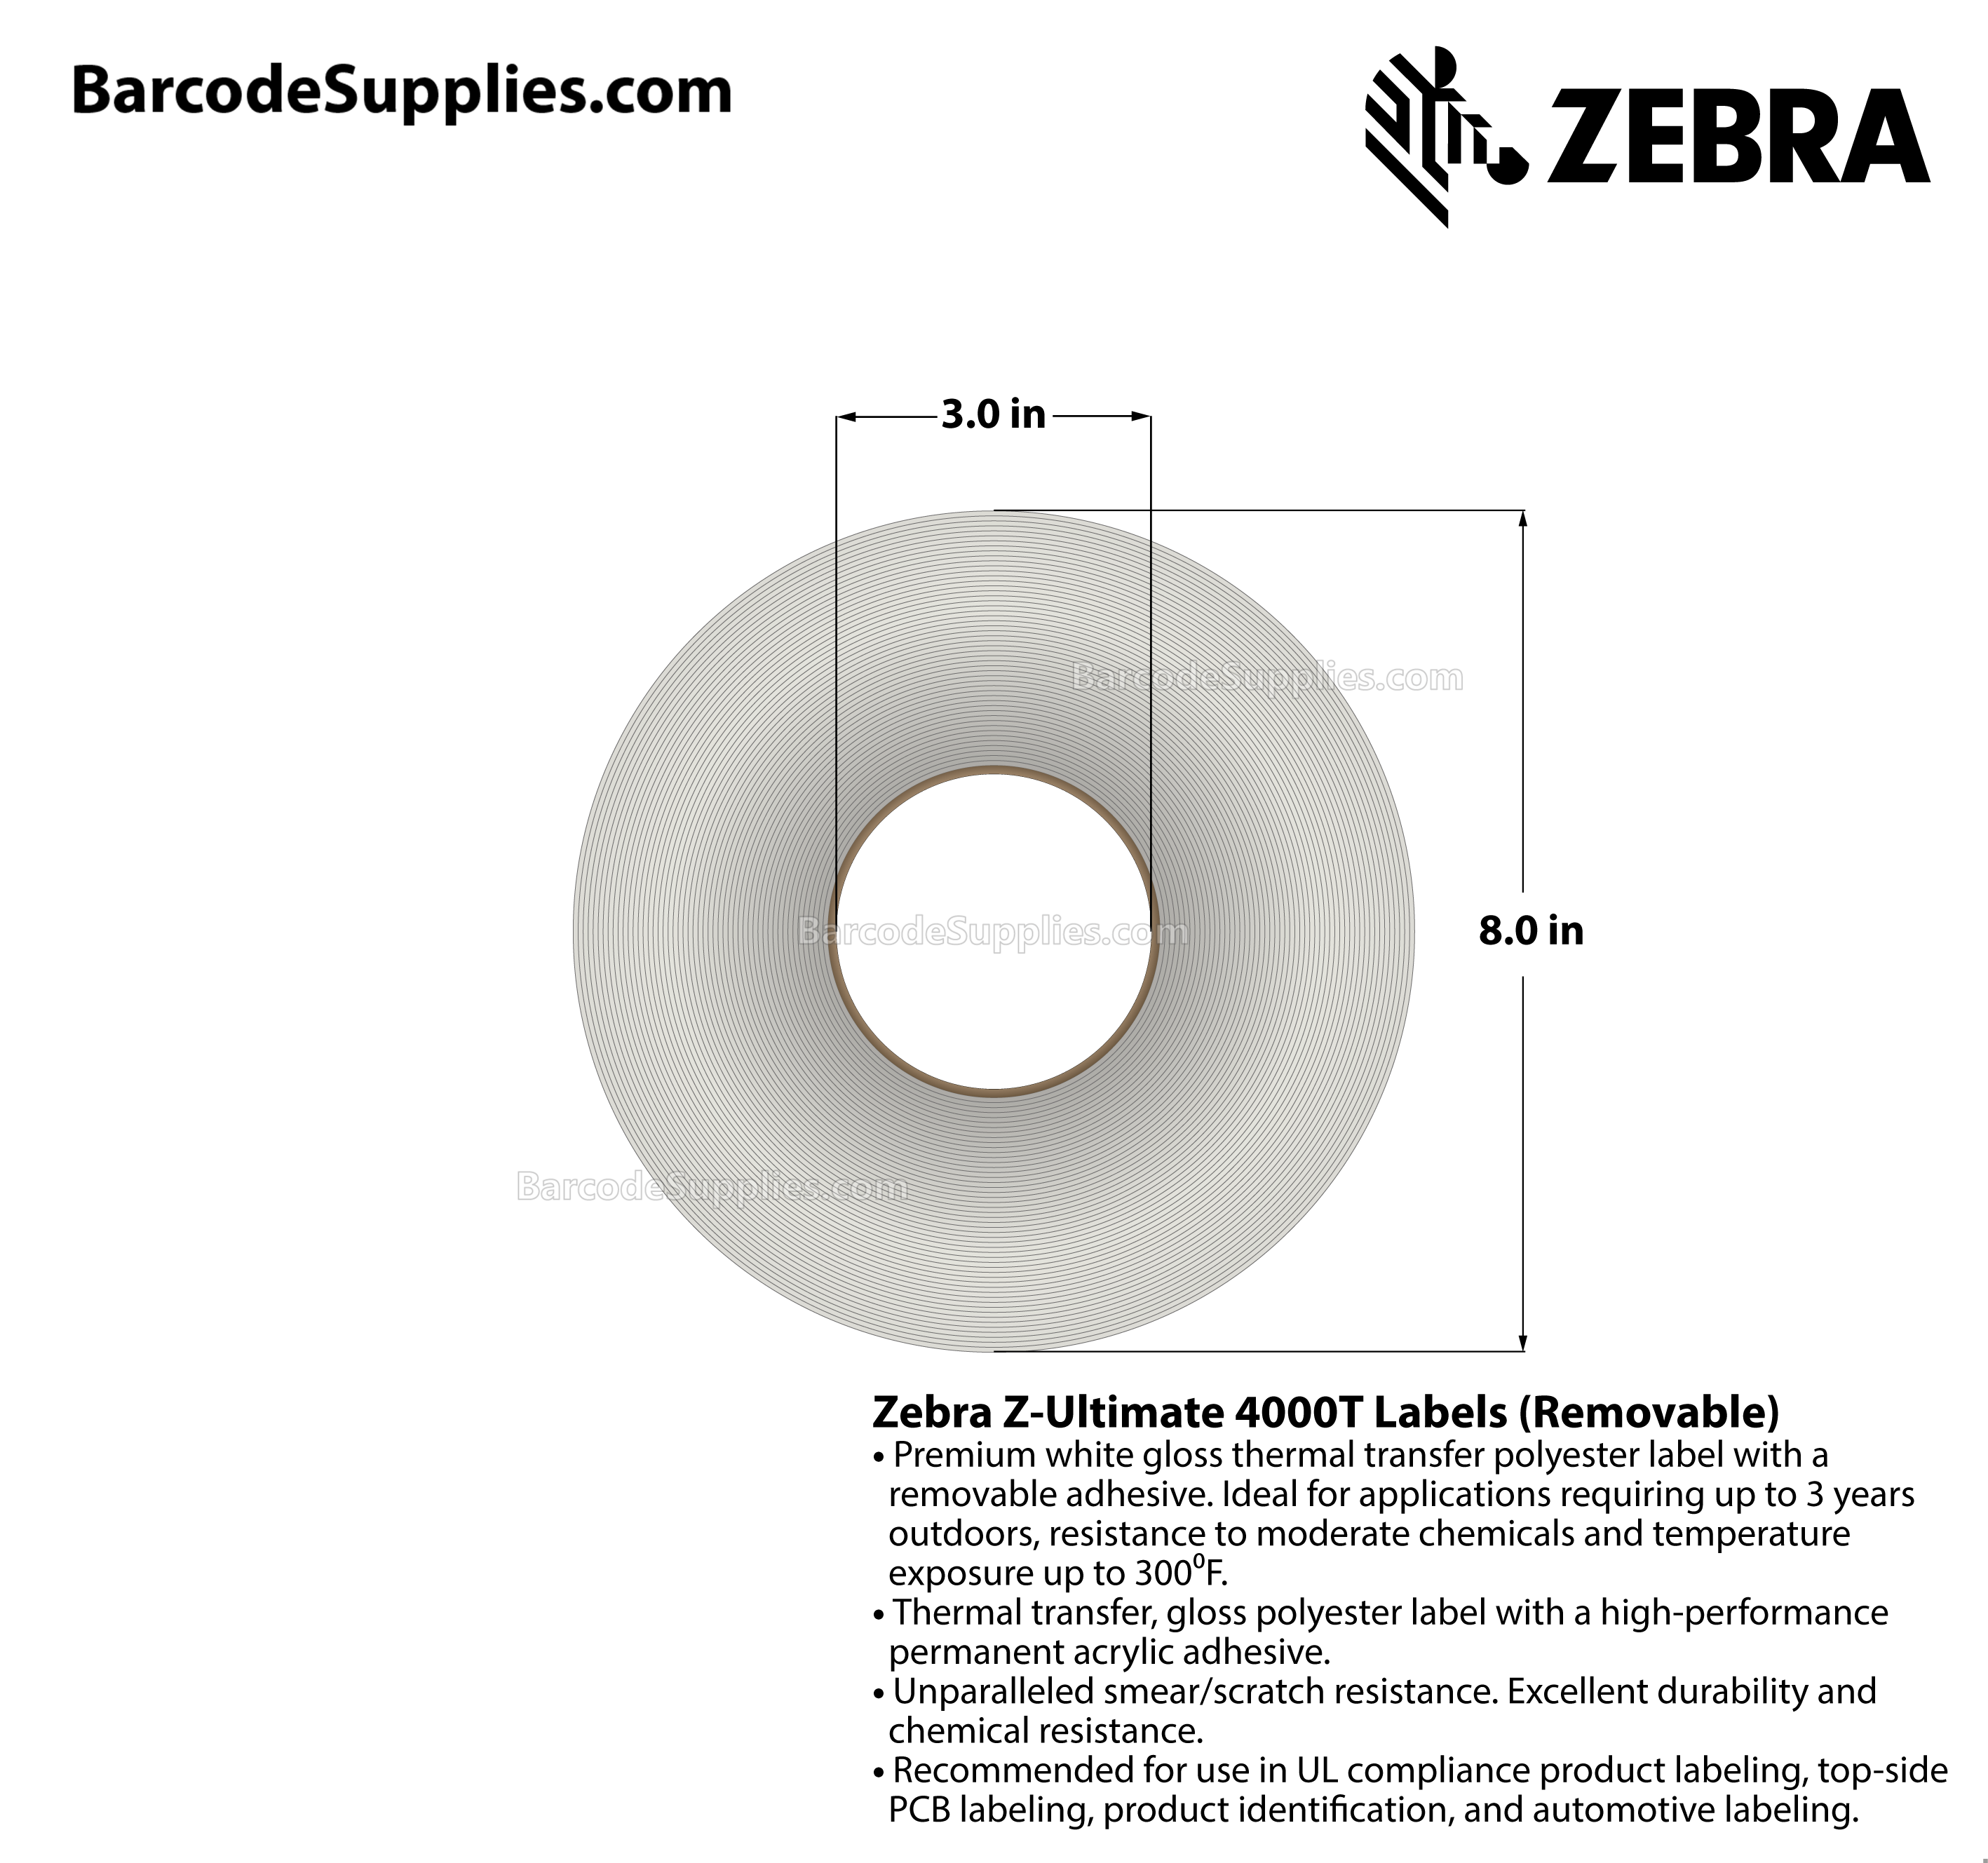 3 x 2 Thermal Transfer White Z-Ultimate 4000T Removable Labels With Removable Adhesive - Perforated - 1000 Labels Per Roll - Carton Of 1 Rolls - 1000 Labels Total - MPN: 10023151